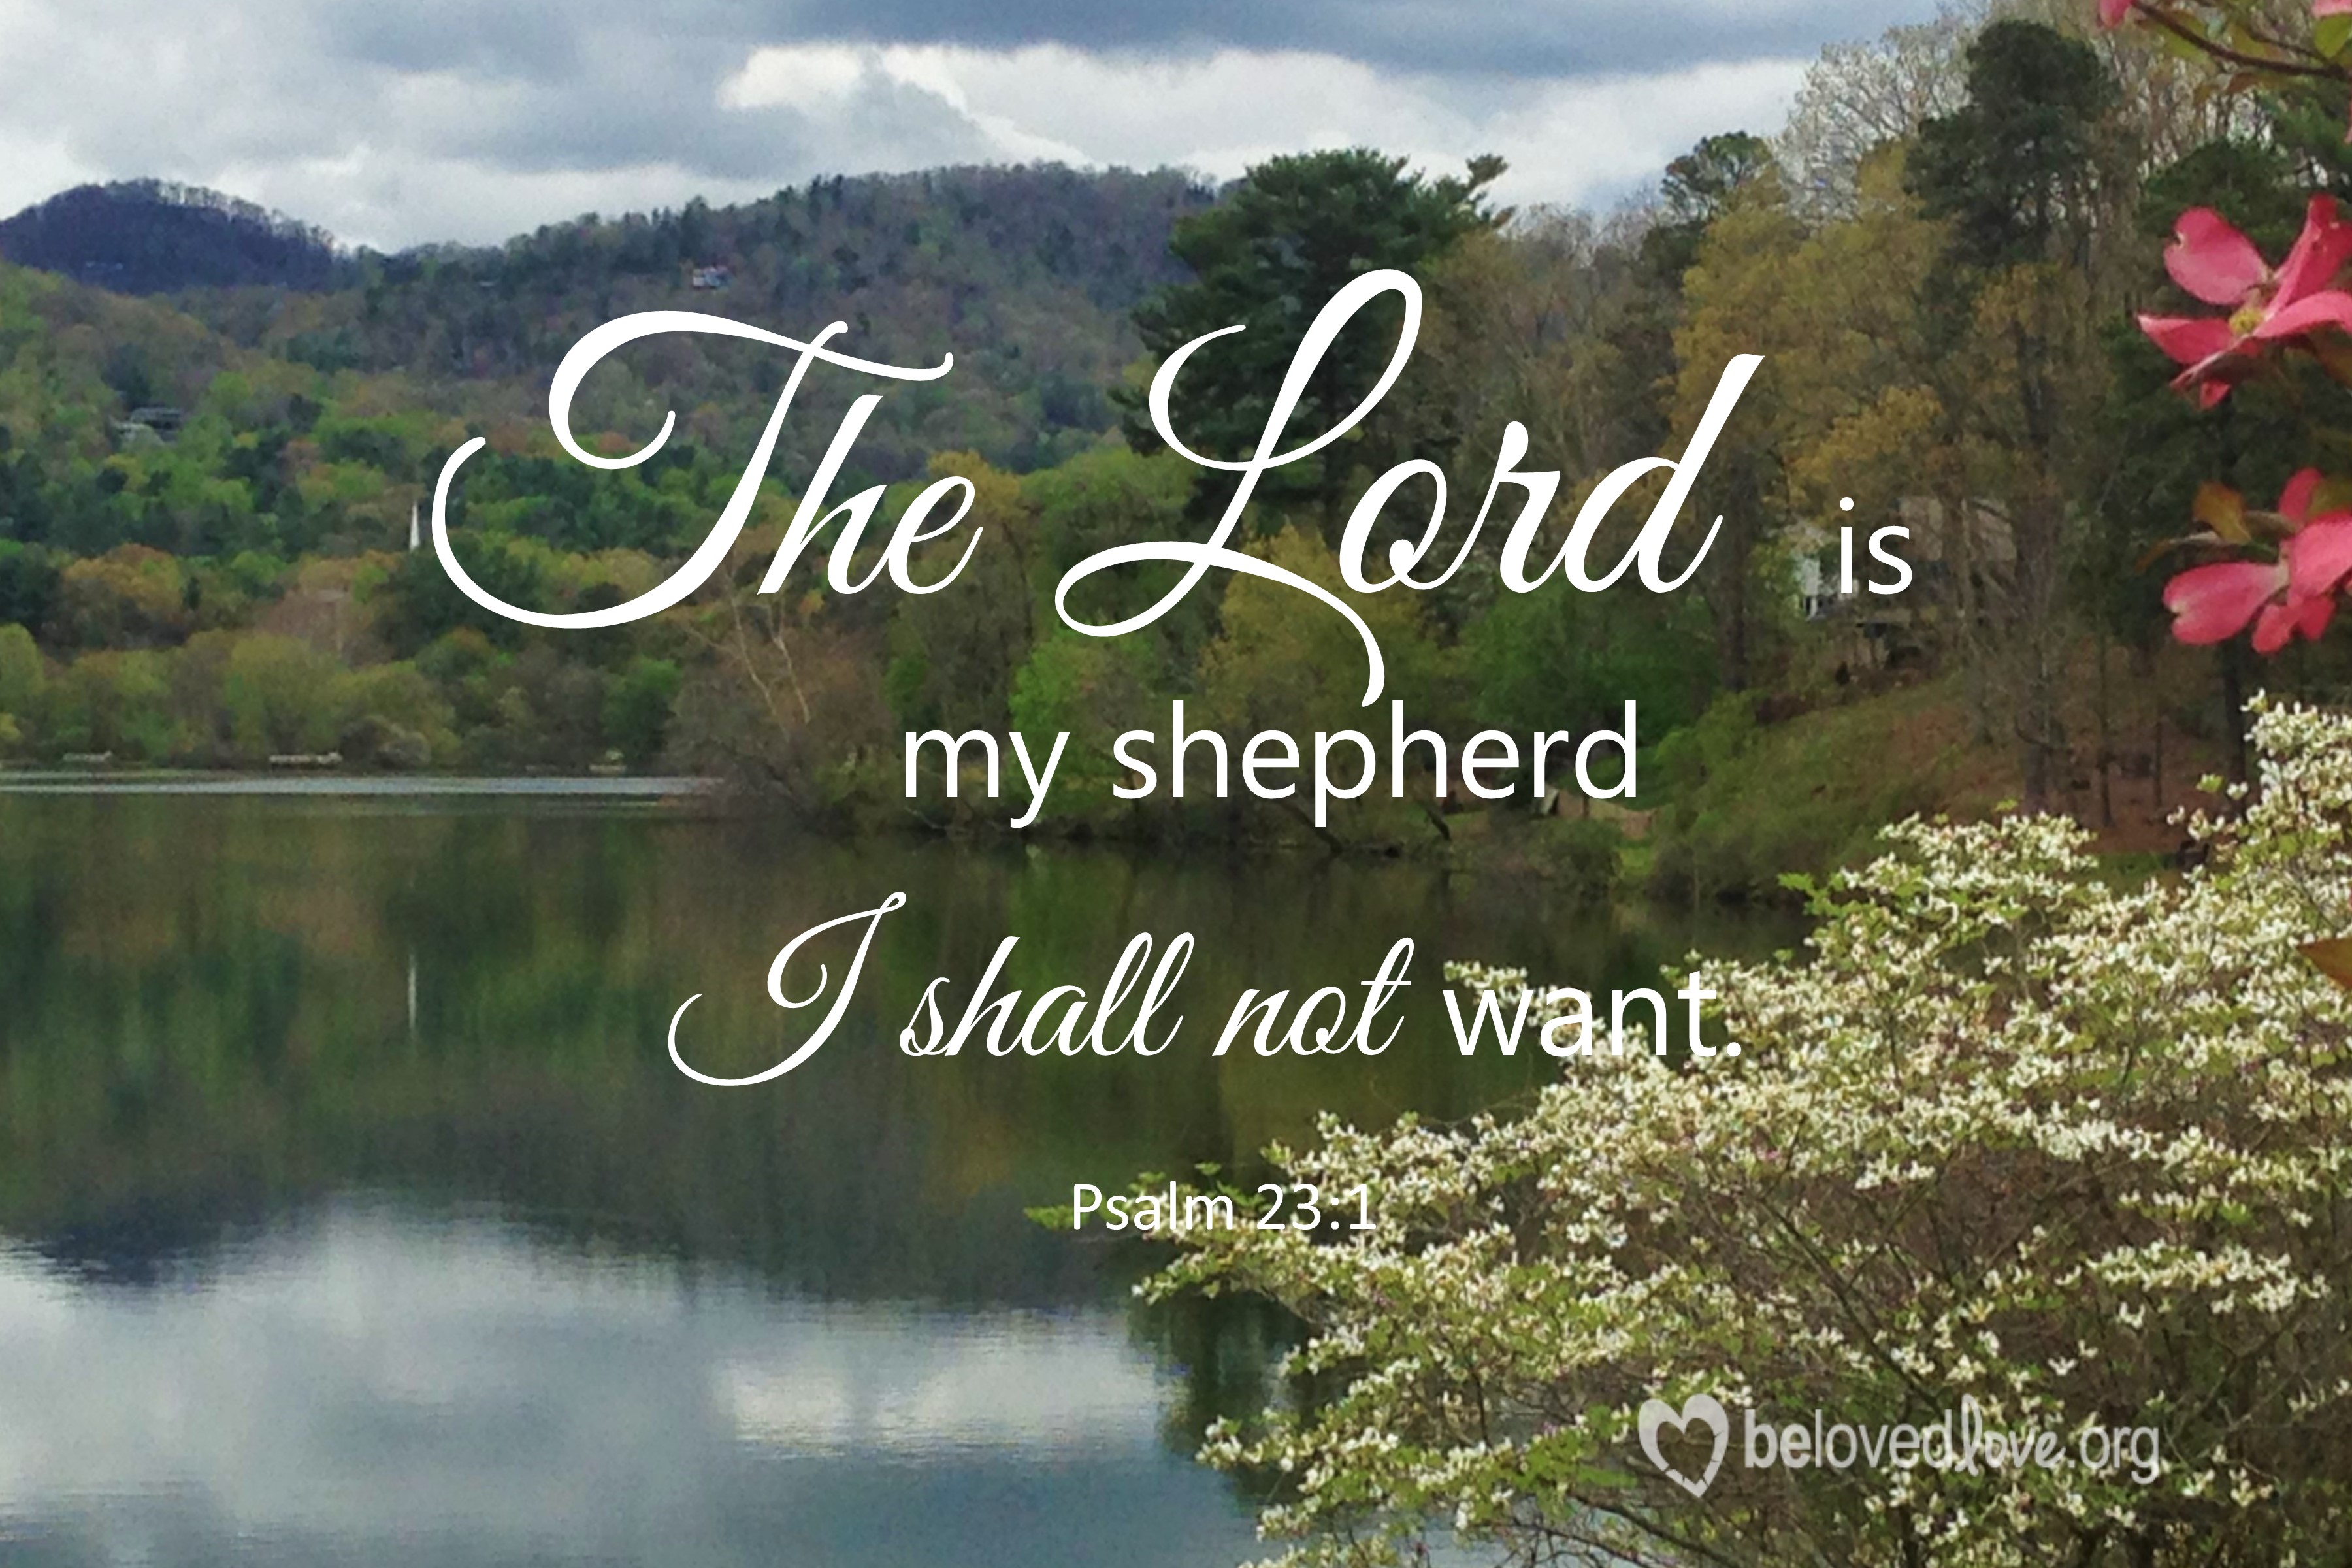 The Lord is my shepherd, I shall not want. - Belovedlove